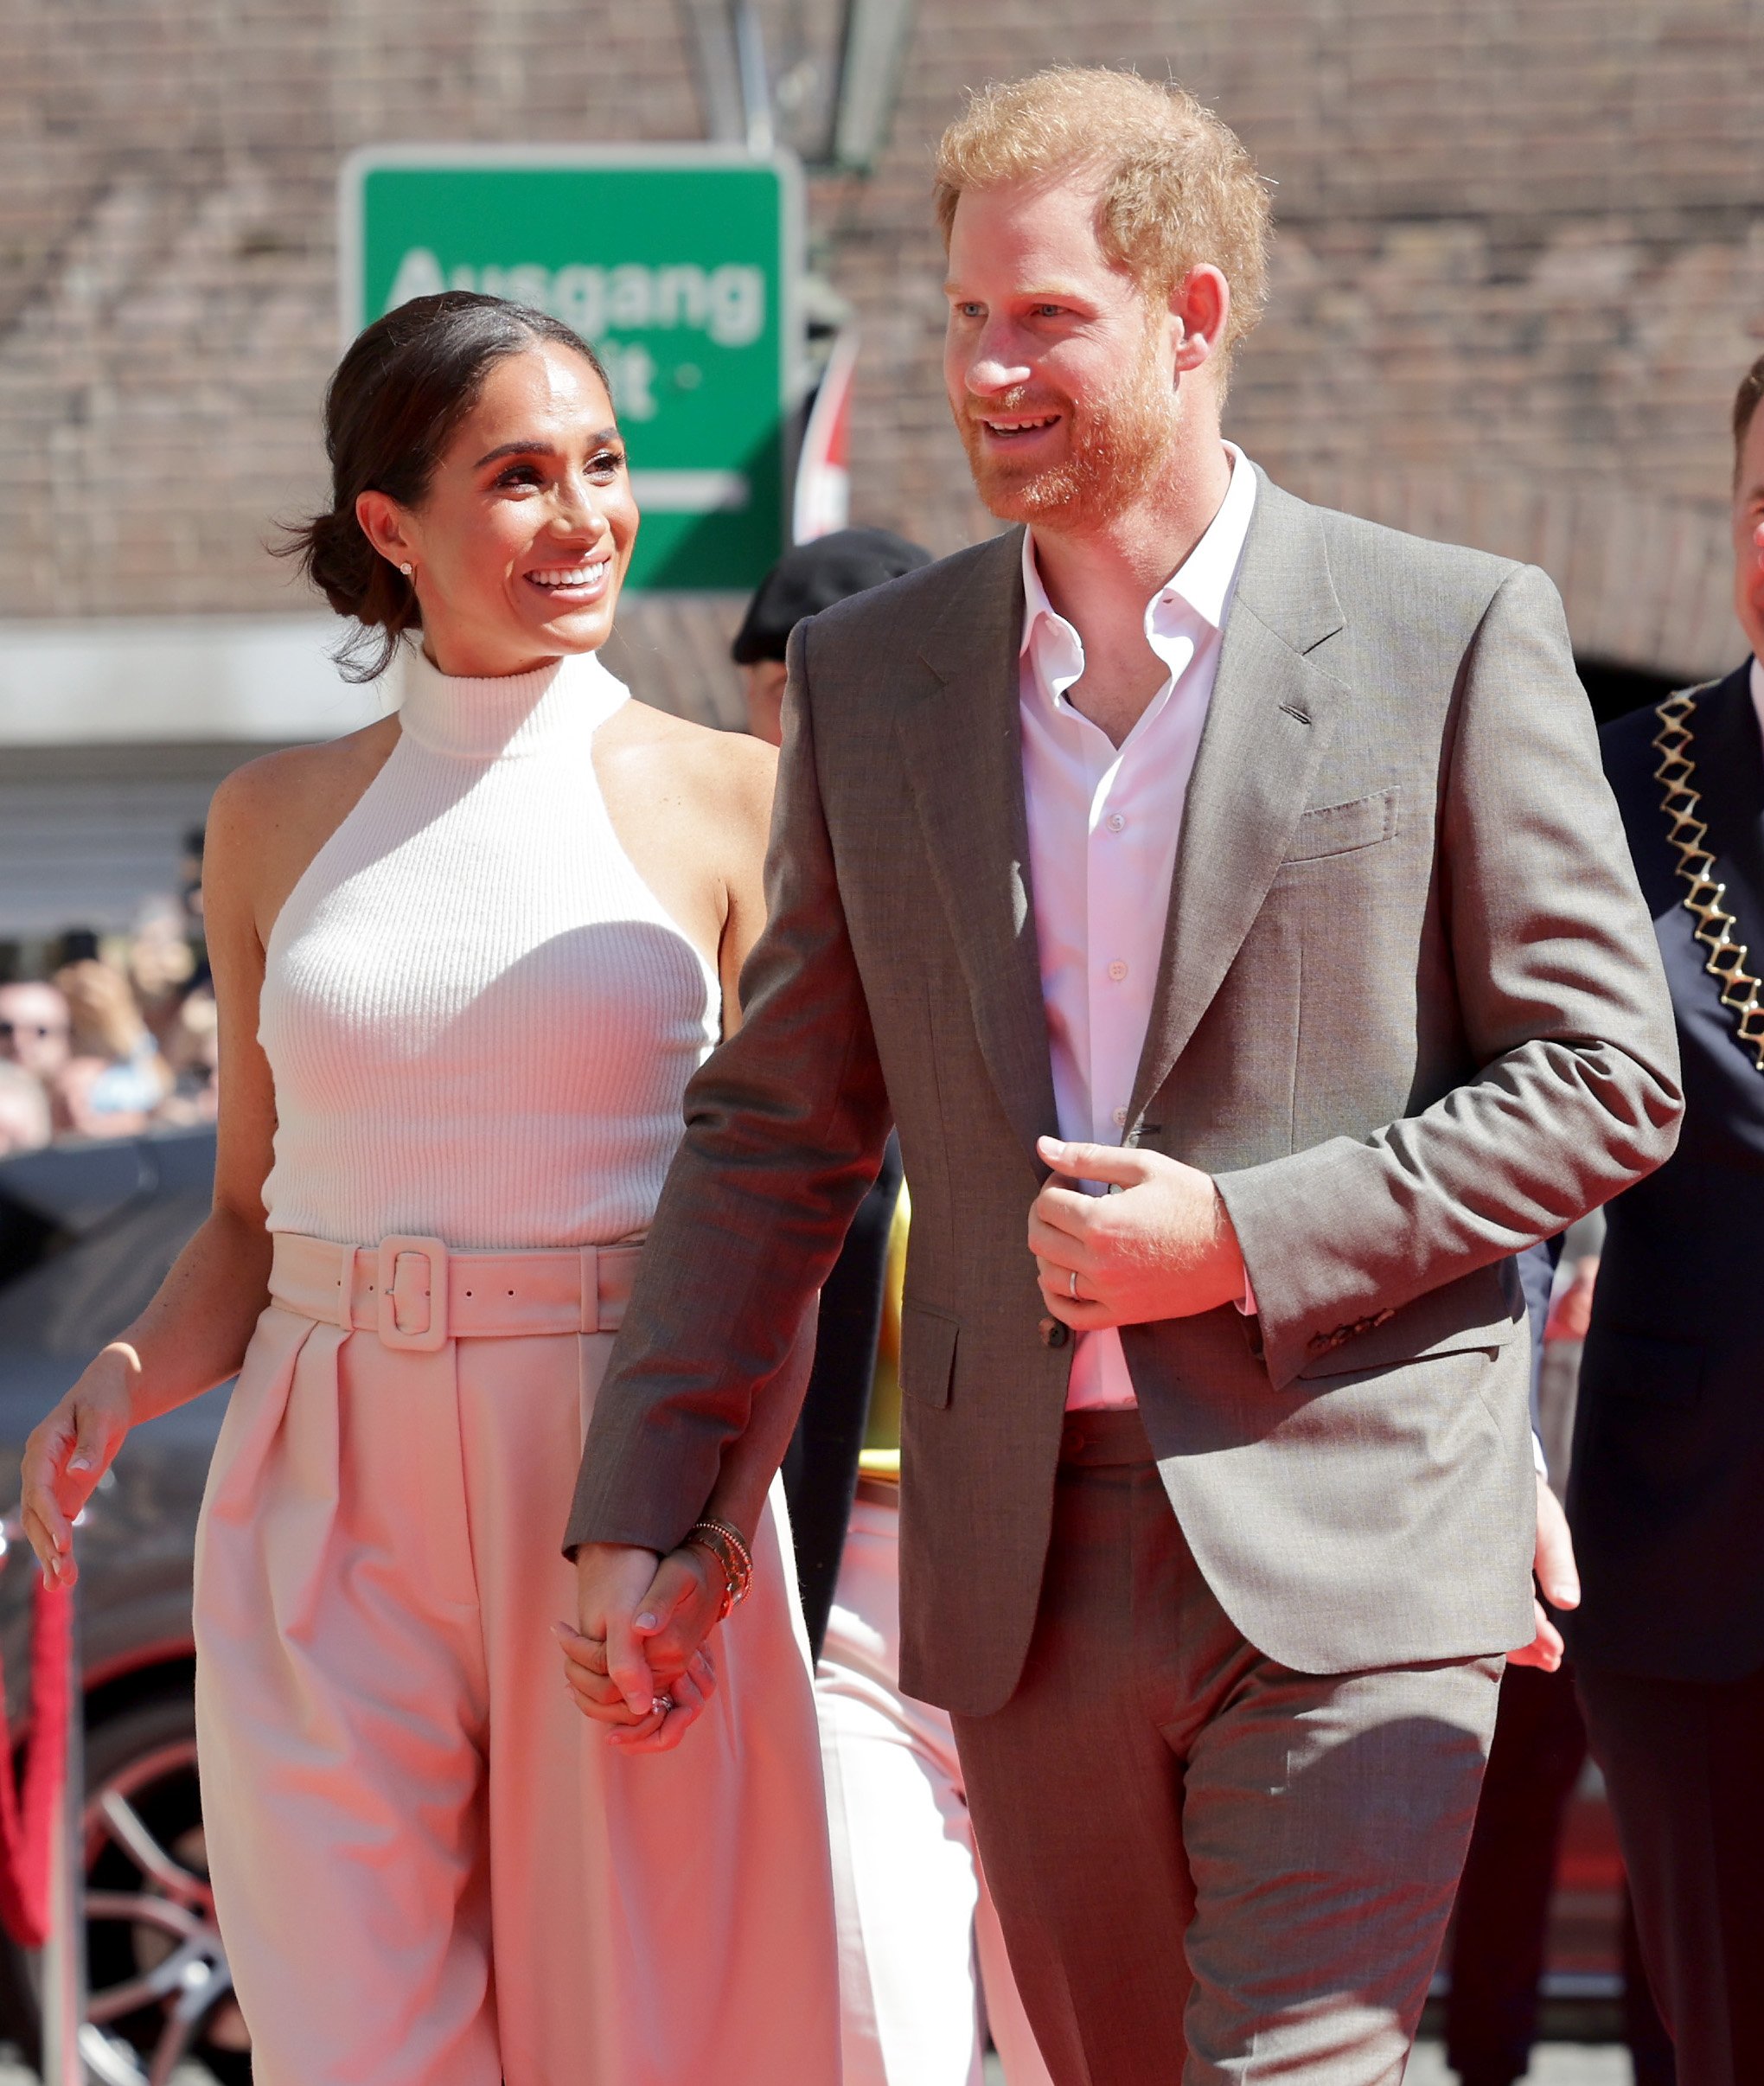 Prince Harry, Duke of Sussex and Meghan, Duchess of Sussex arrive at the town hall during the Invictus Games Dusseldorf 2023 - One Year To Go events, on September 06, 2022, in Dusseldorf, Germany. | Source: Getty Images